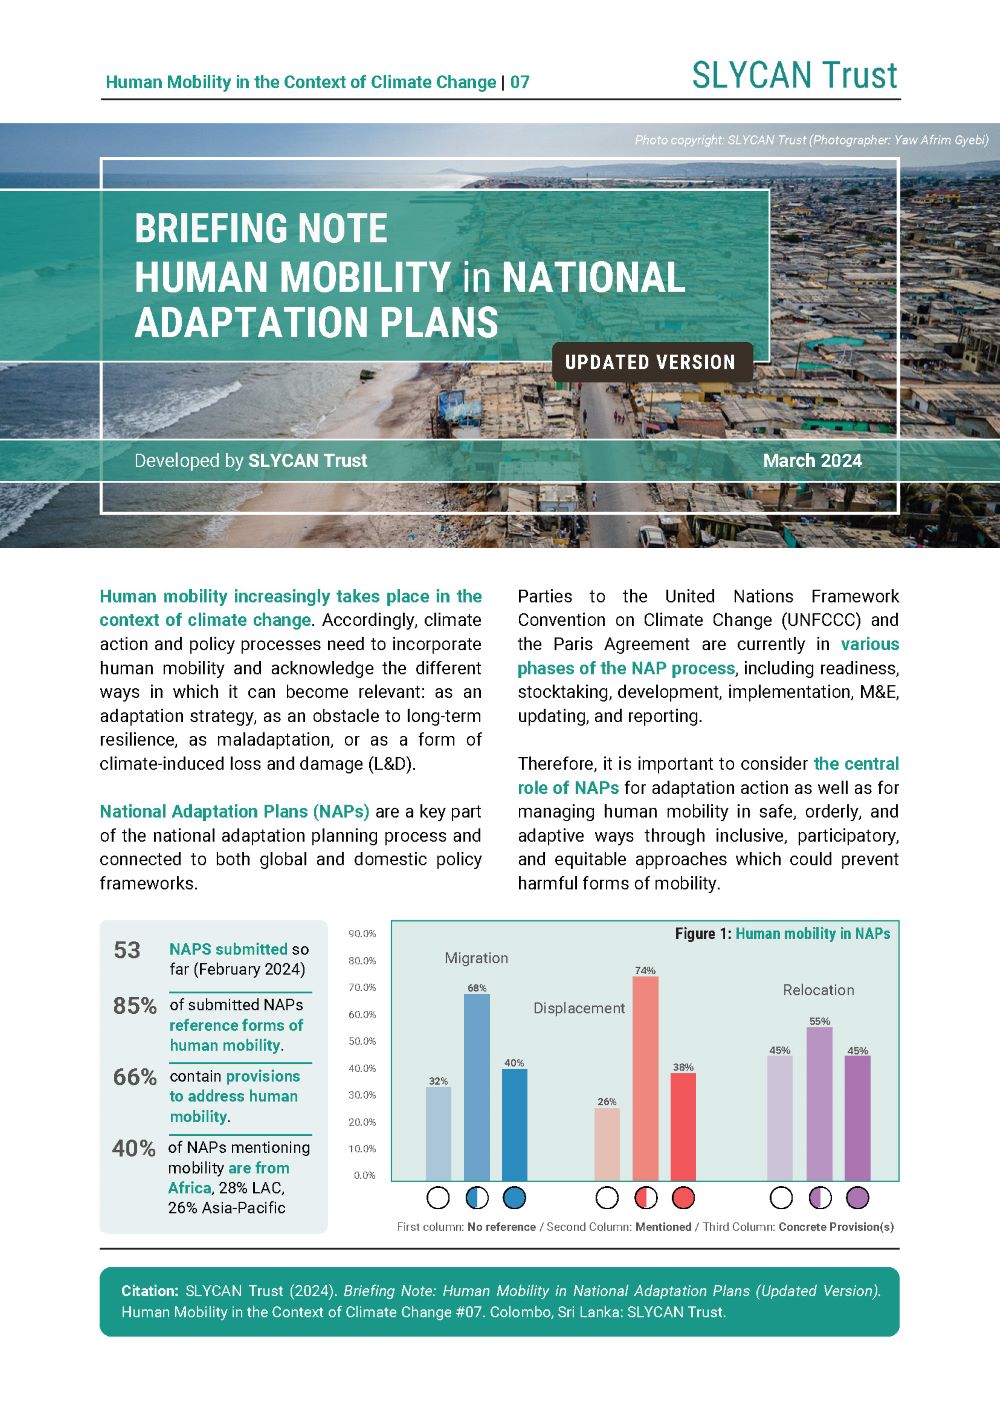 Briefing Note – Human Mobility in National Adaptation Plans (updated version)